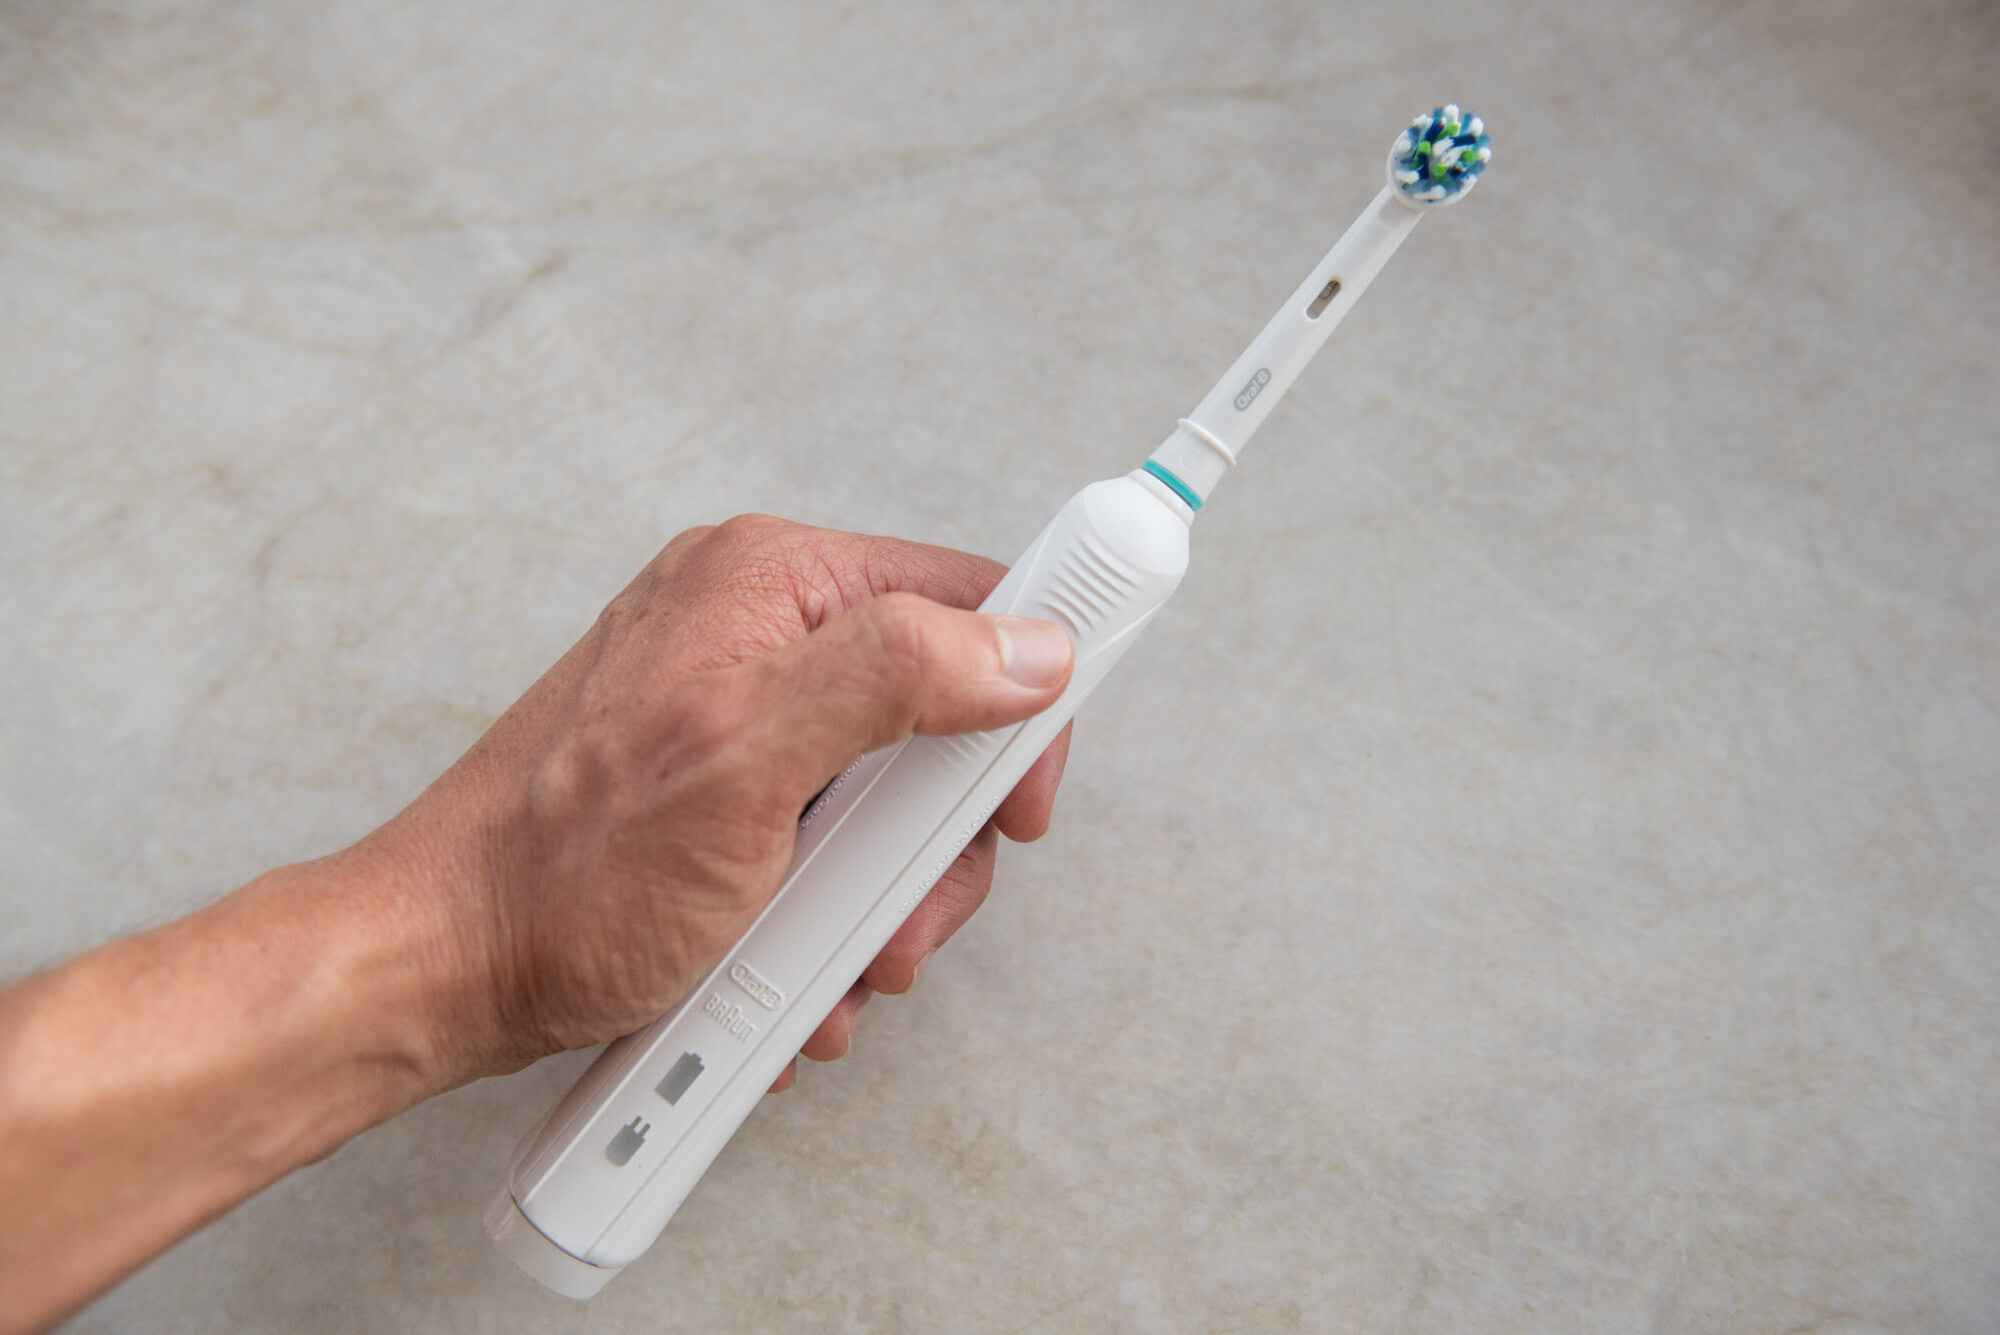 The Best Self-Cleaning Electric Toothbrush Review 2017